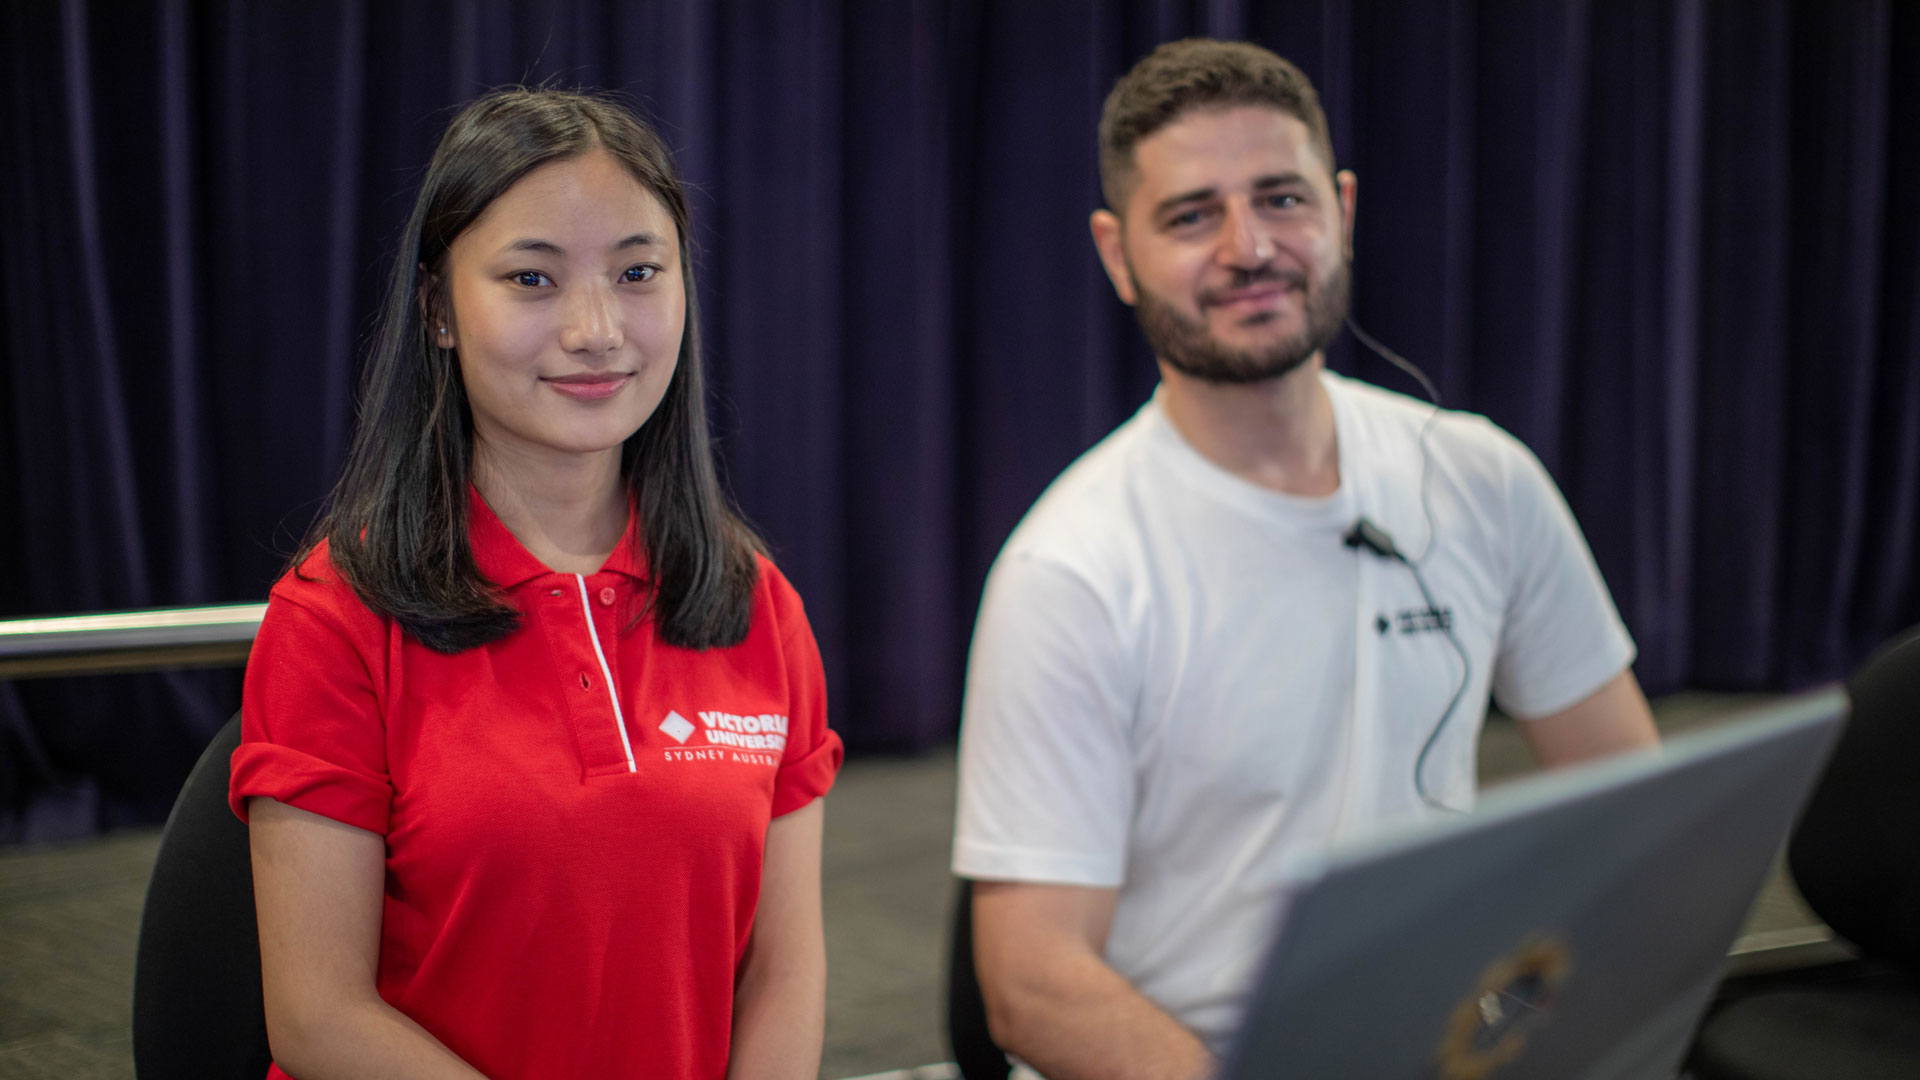 A VU Sydney student in a red shirt uniform, sitting next to a student. Both are looking at the camera and smiling.